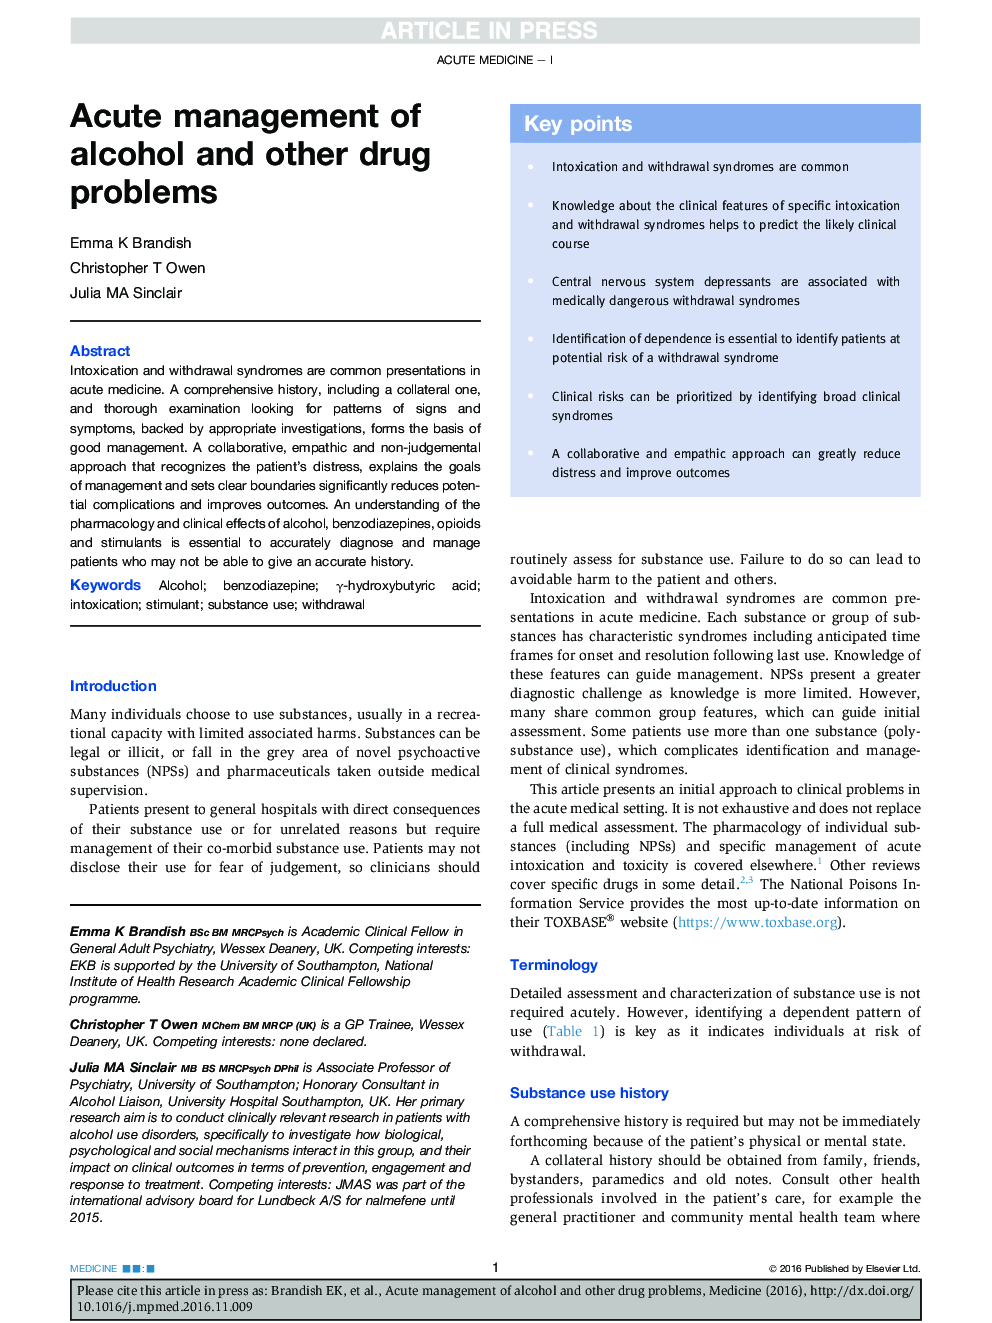 Acute management of alcohol and other drug problems